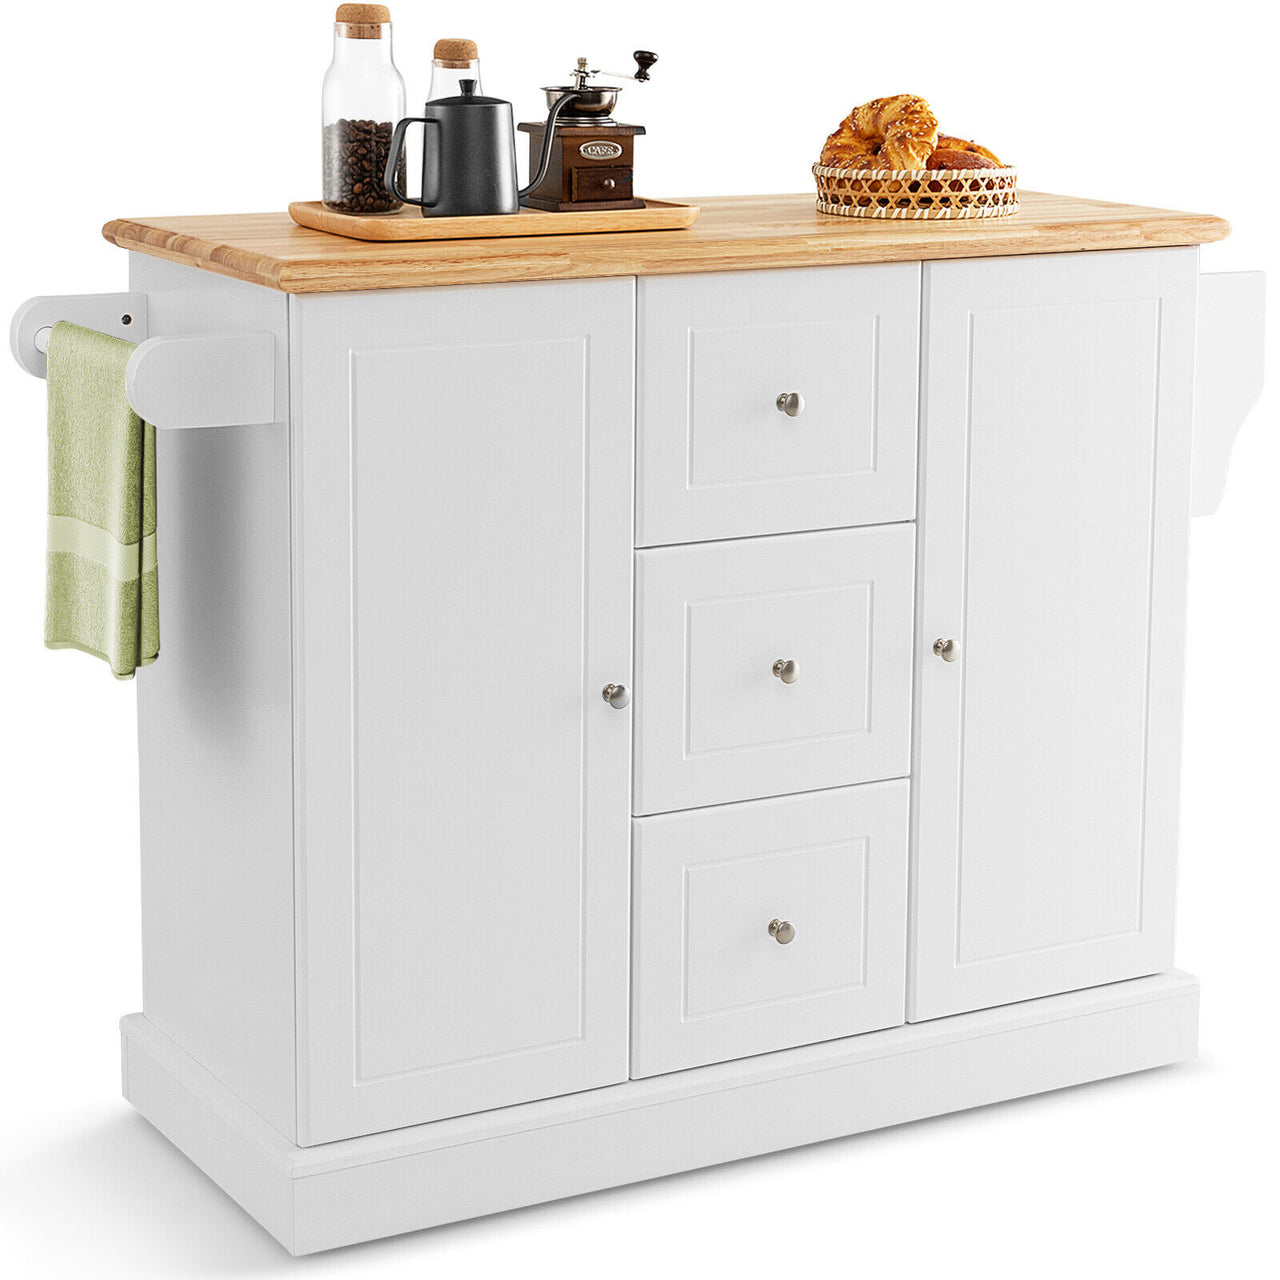 2-Door Large Mobile Kitchen Island Cart with Hidden Wheelsand 3 Drawers - Gallery View 1 of 11